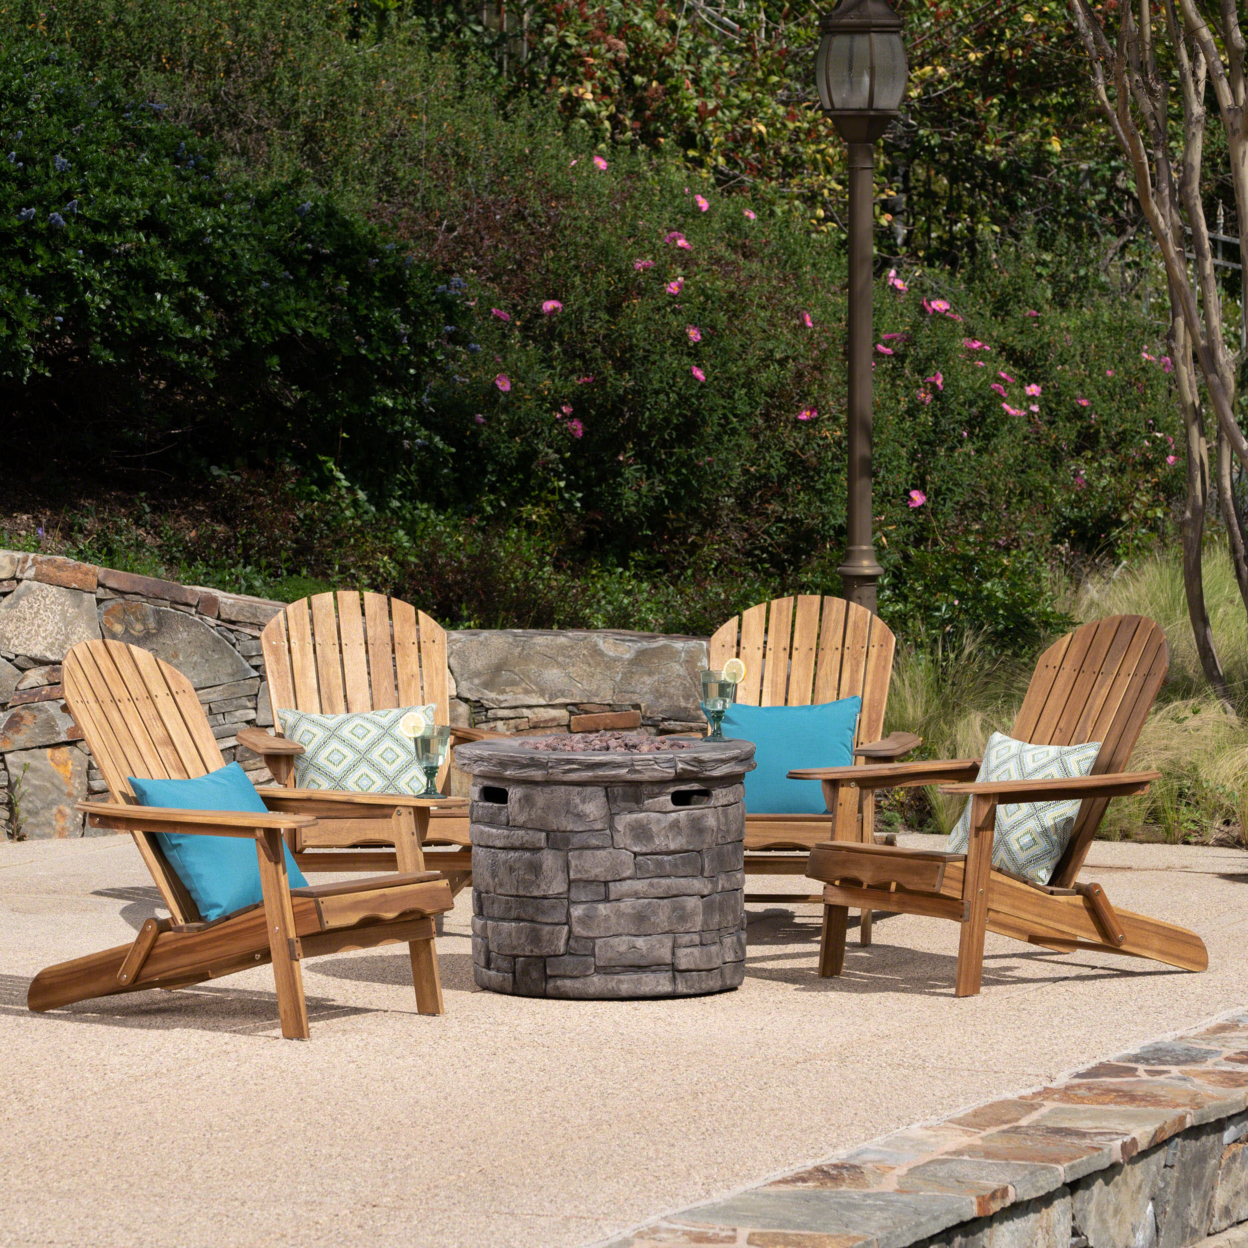 David Outdoor 5 Piece Adirondack Chair Set With Fire Pit - Natural